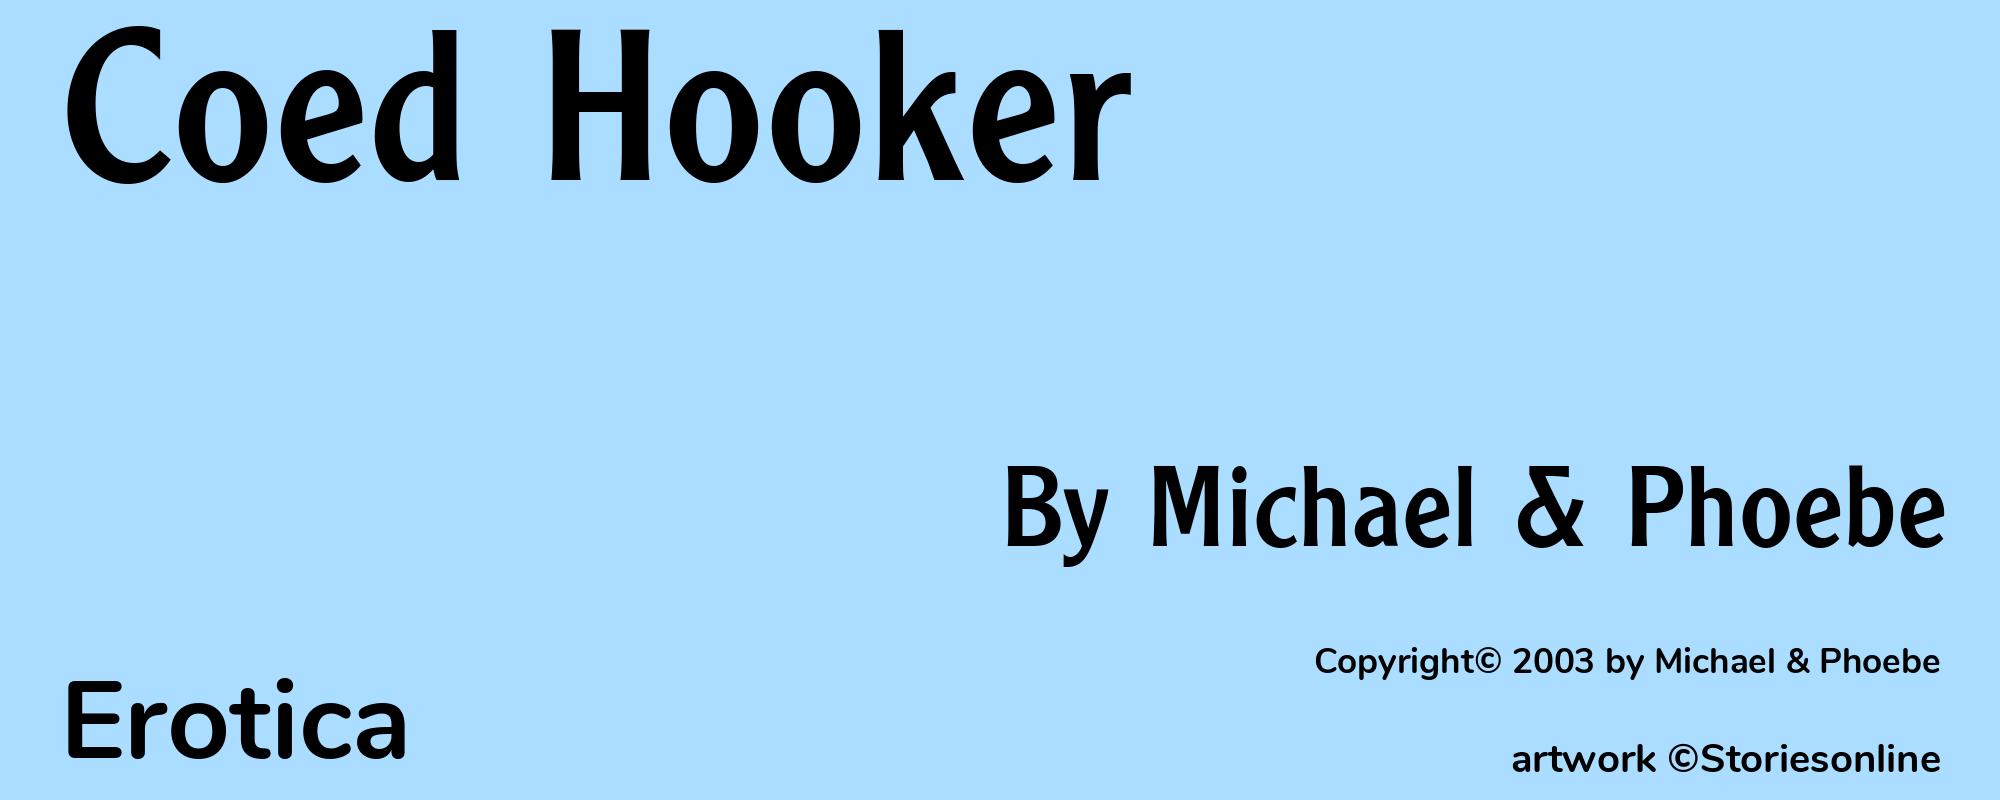 Coed Hooker - Cover